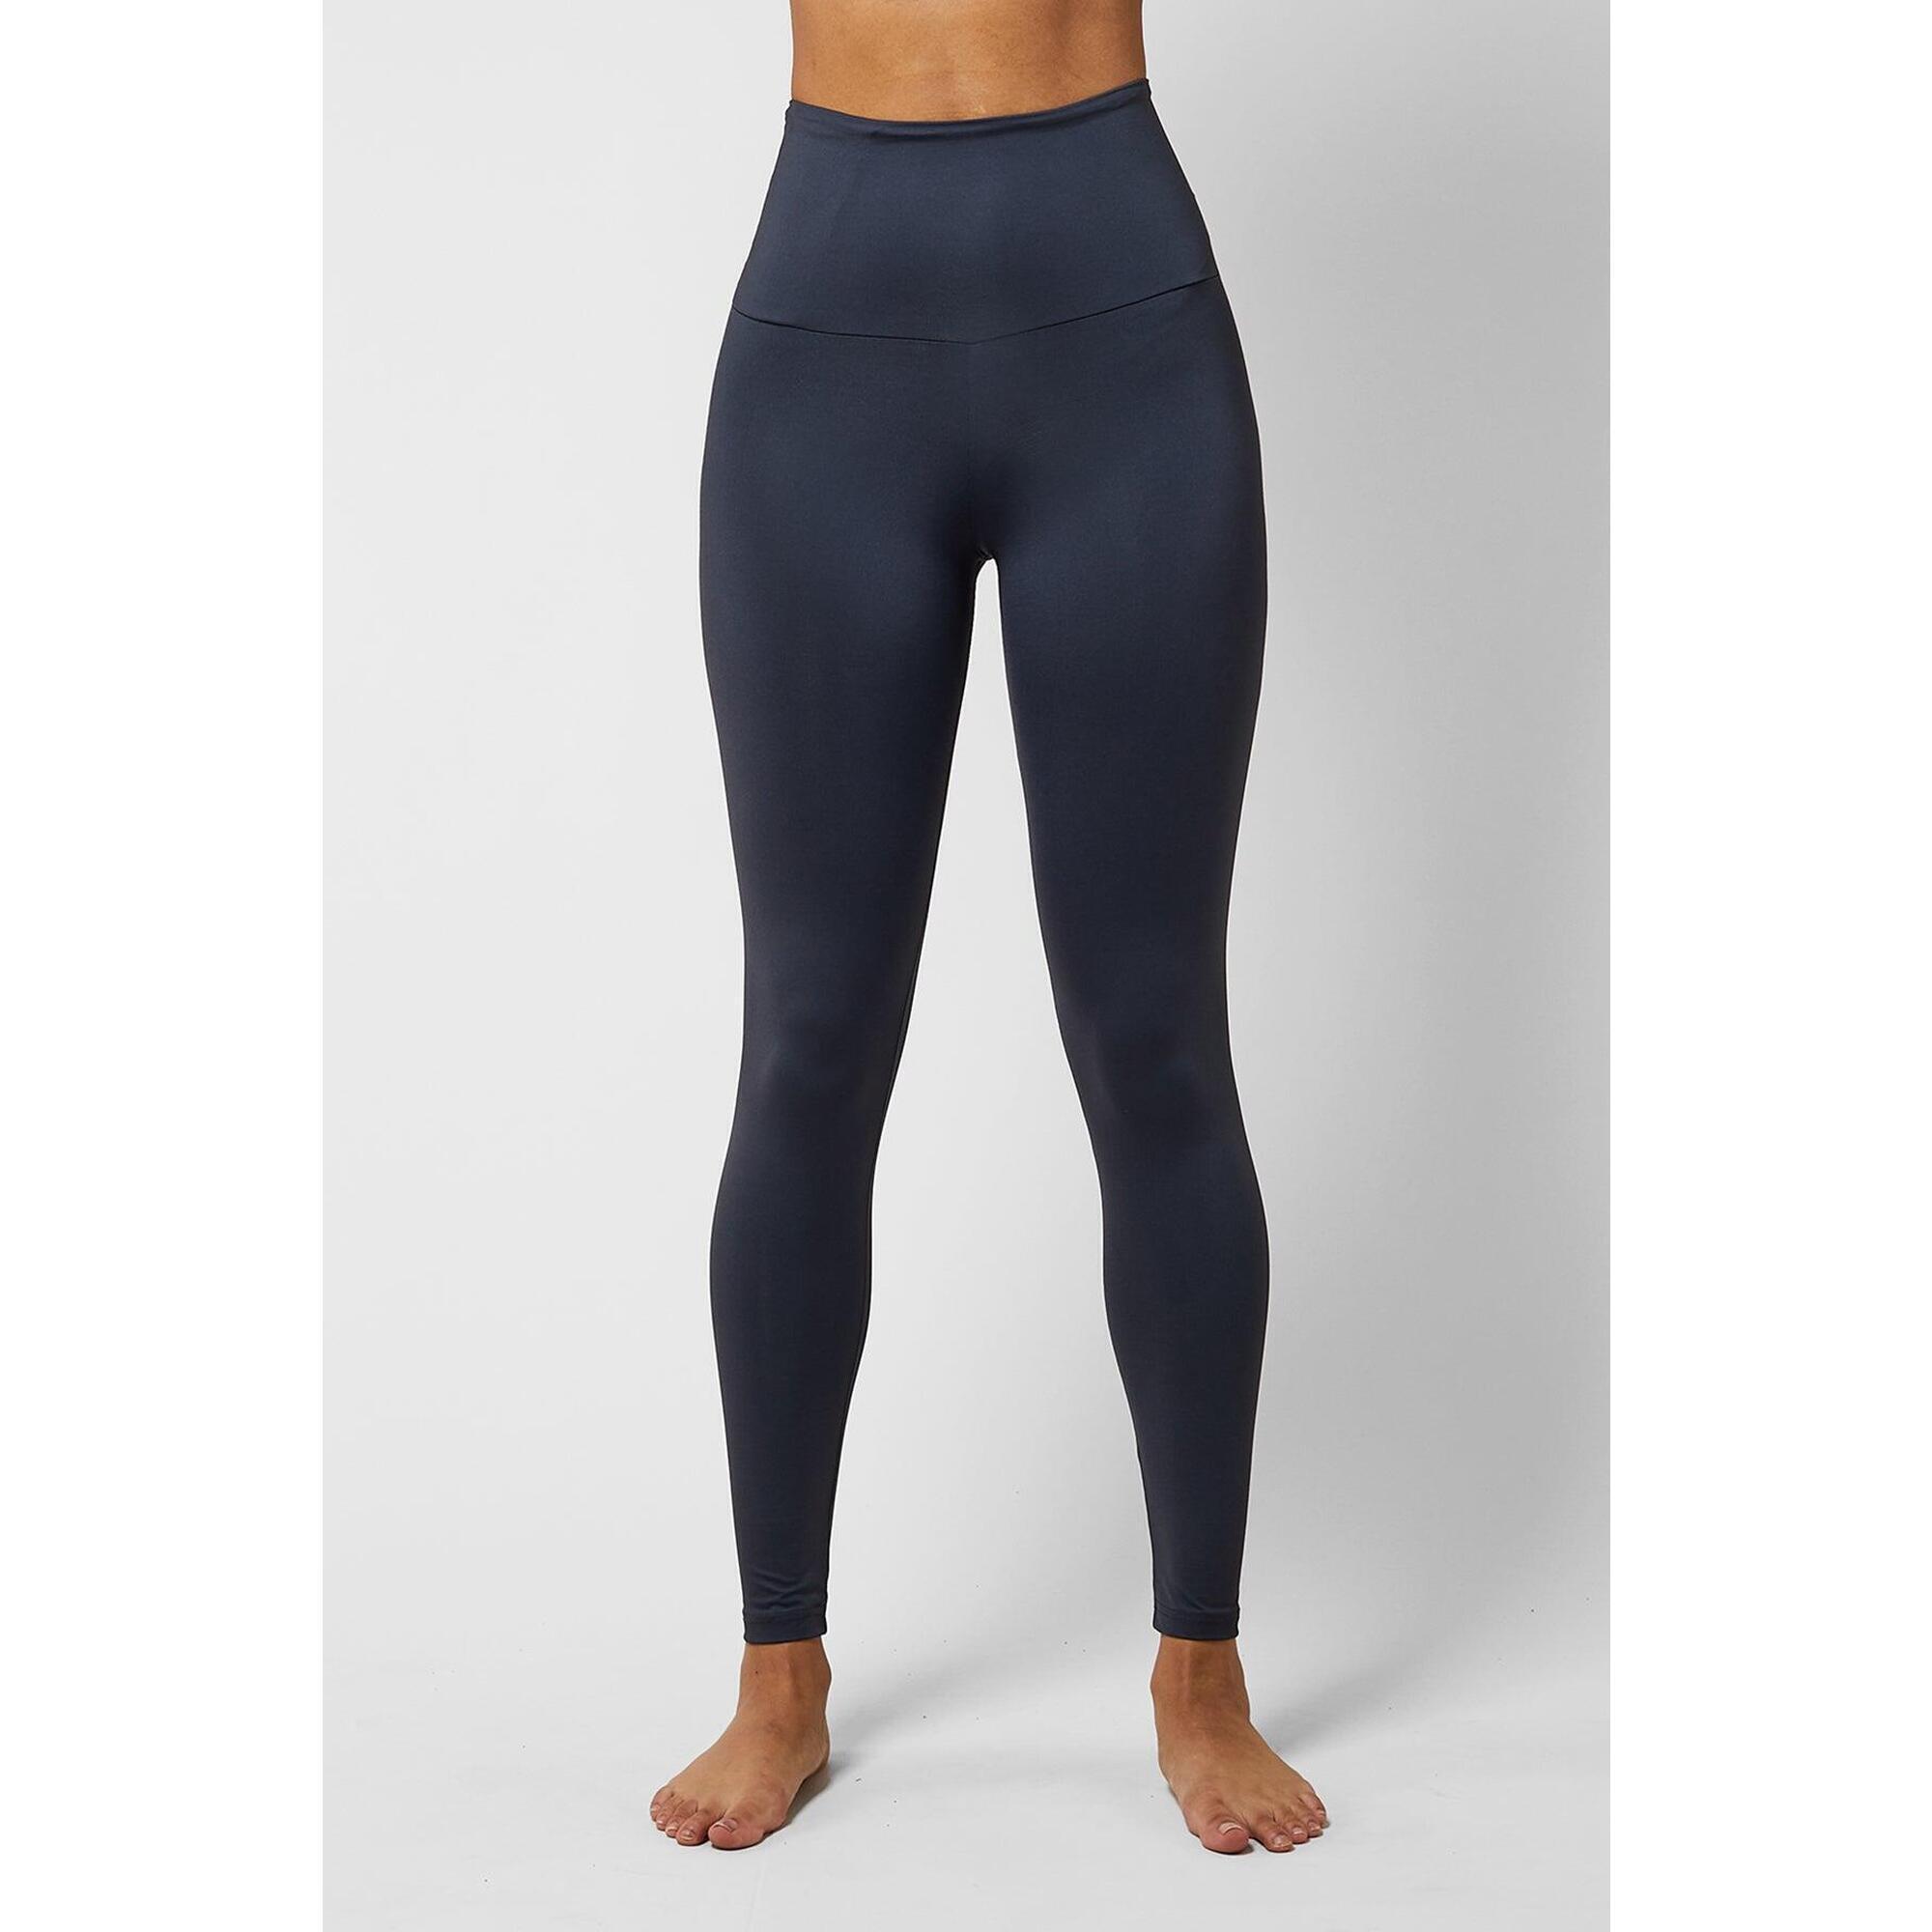 Extra Strong Compression Tummy Control Sport Running Leggings Slate 3/6